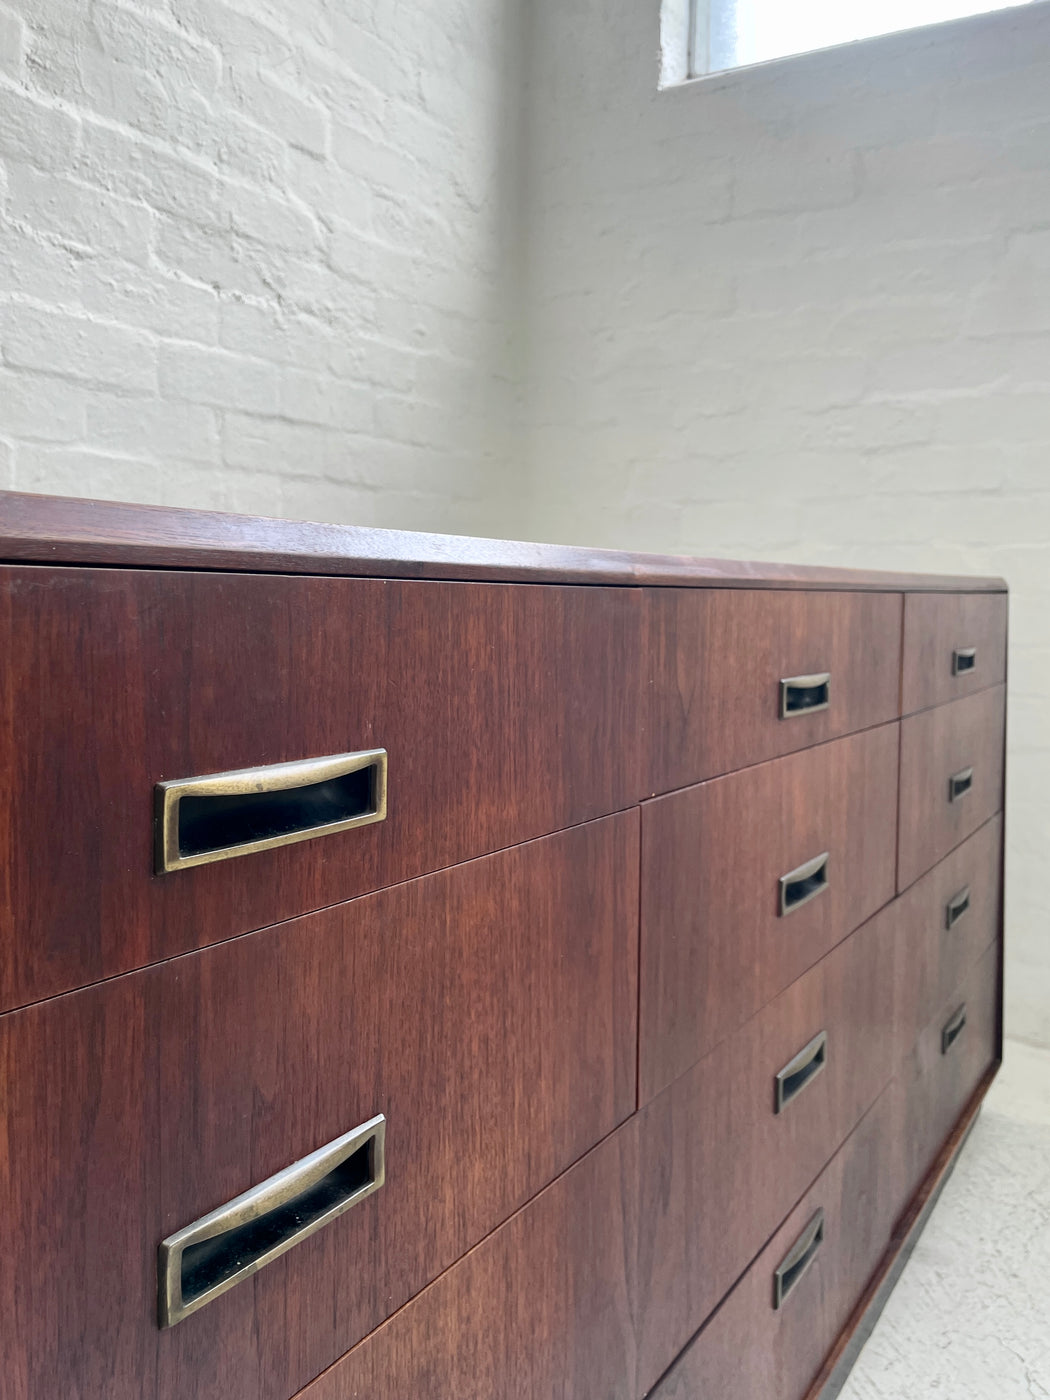 Founders Furniture Walnut Bank of Drawers